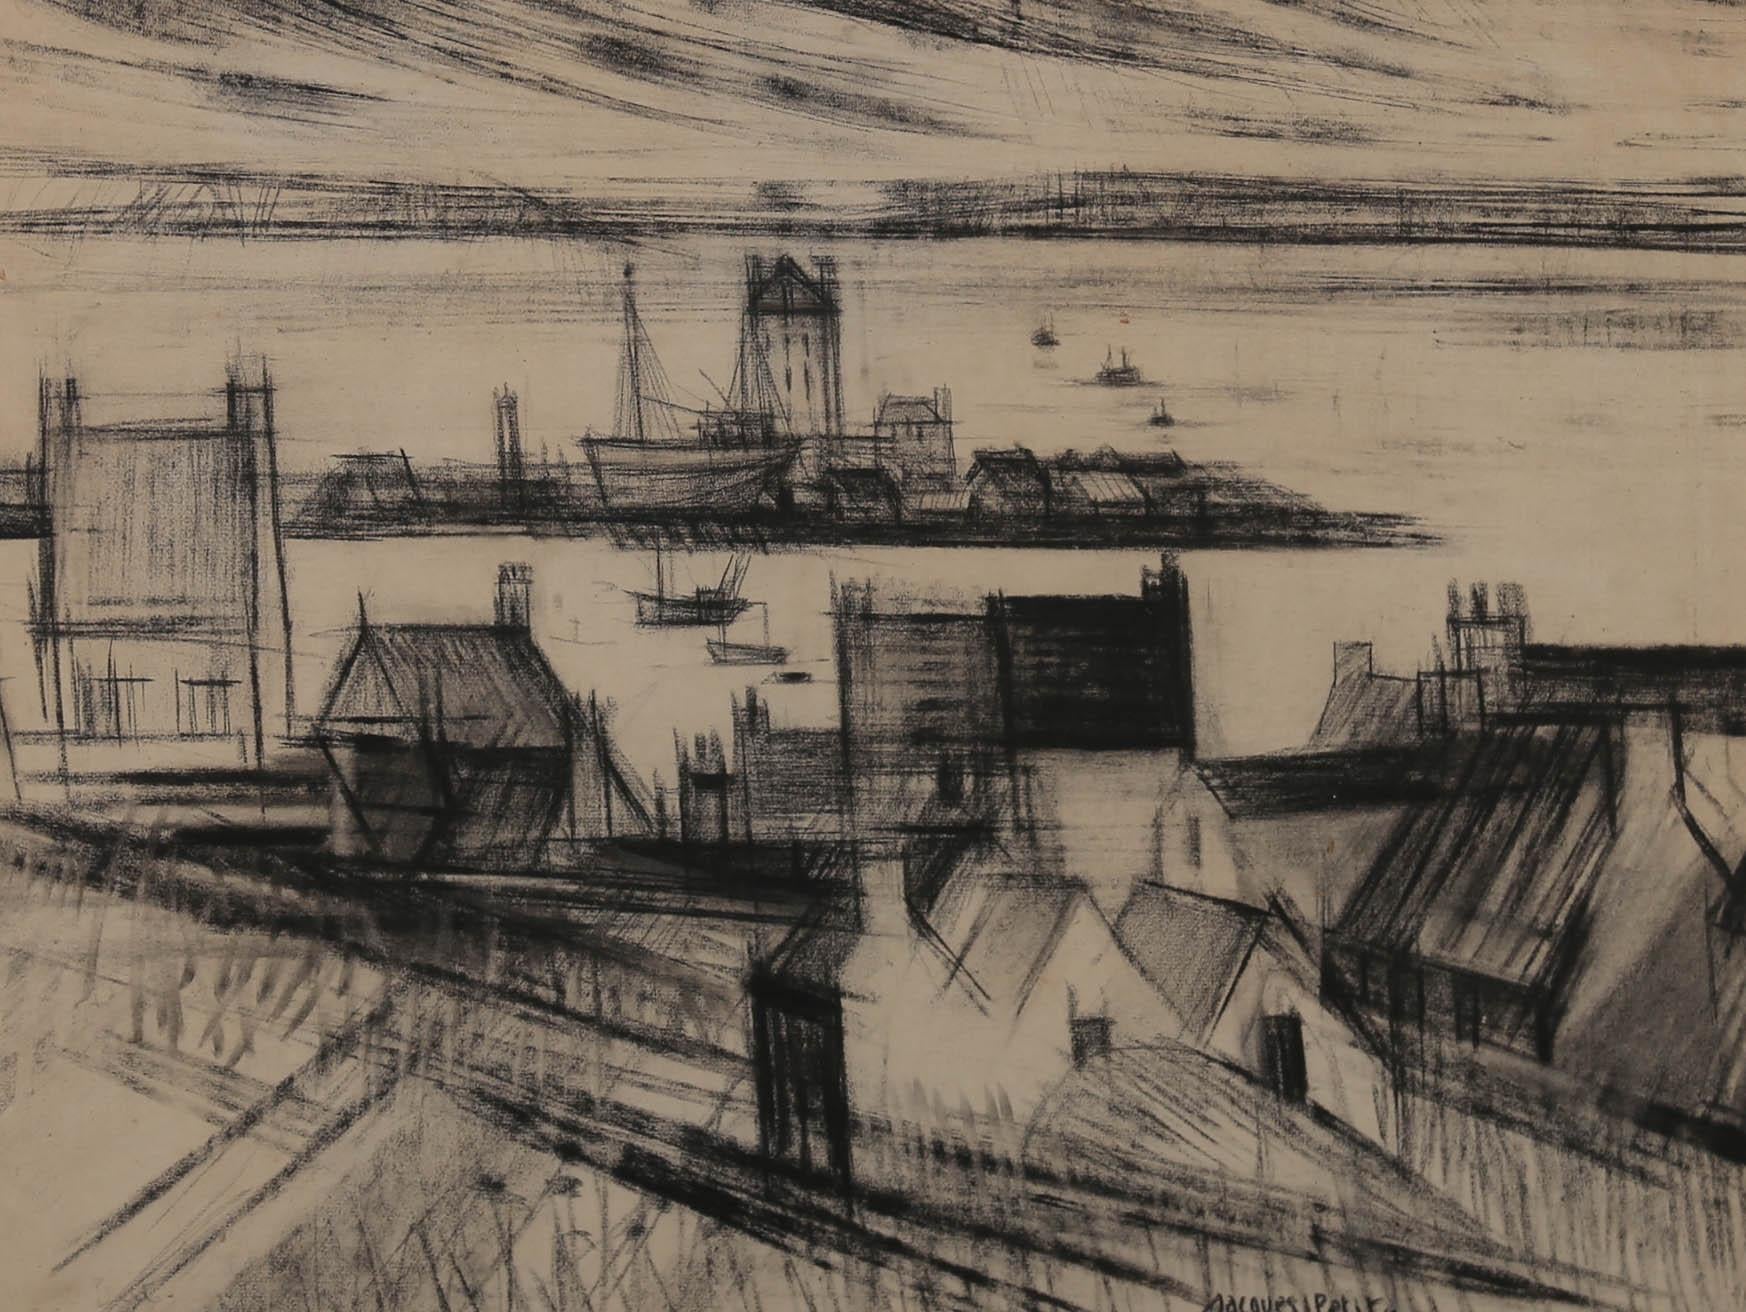 A wonderful mid-century drawing by the French artist Jacques Petit. The study depicts a bustling harbour scene with ships going out to see. The rooftops of the coastal houses crowd the foreground and dockyard buildings can be spotted in the